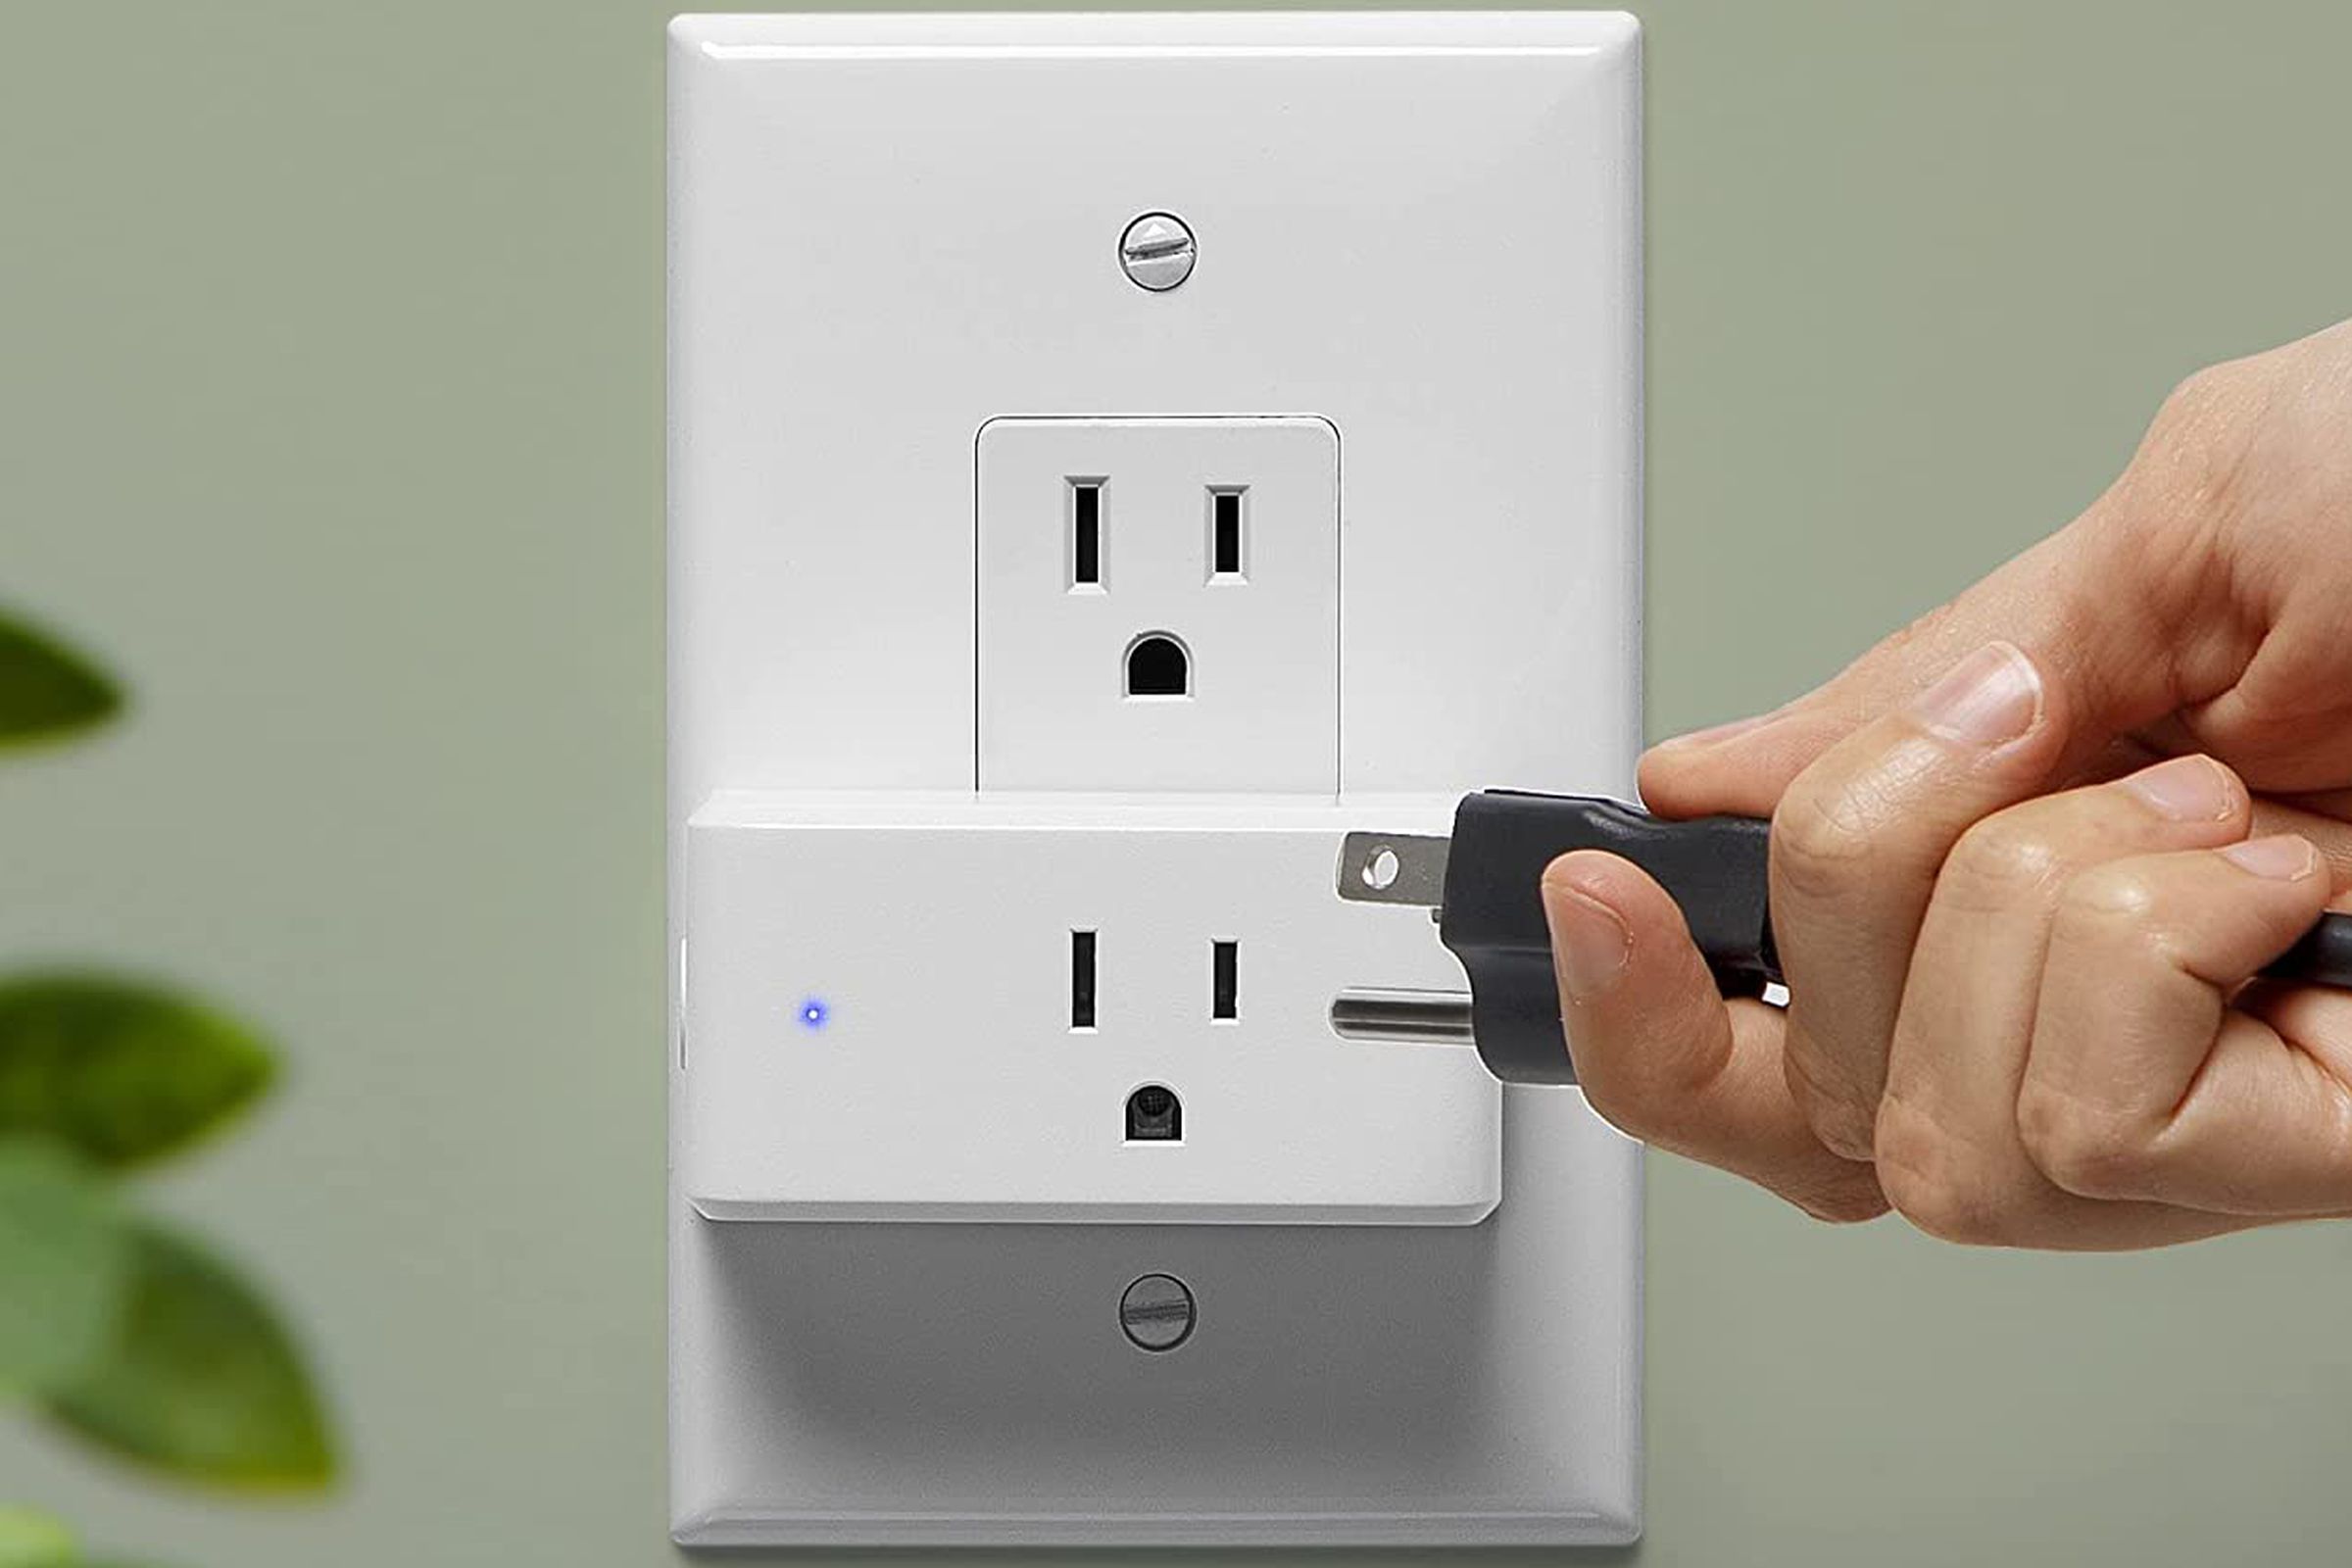 A photo of the iHome Smart plug with a hand plugging in a power cord